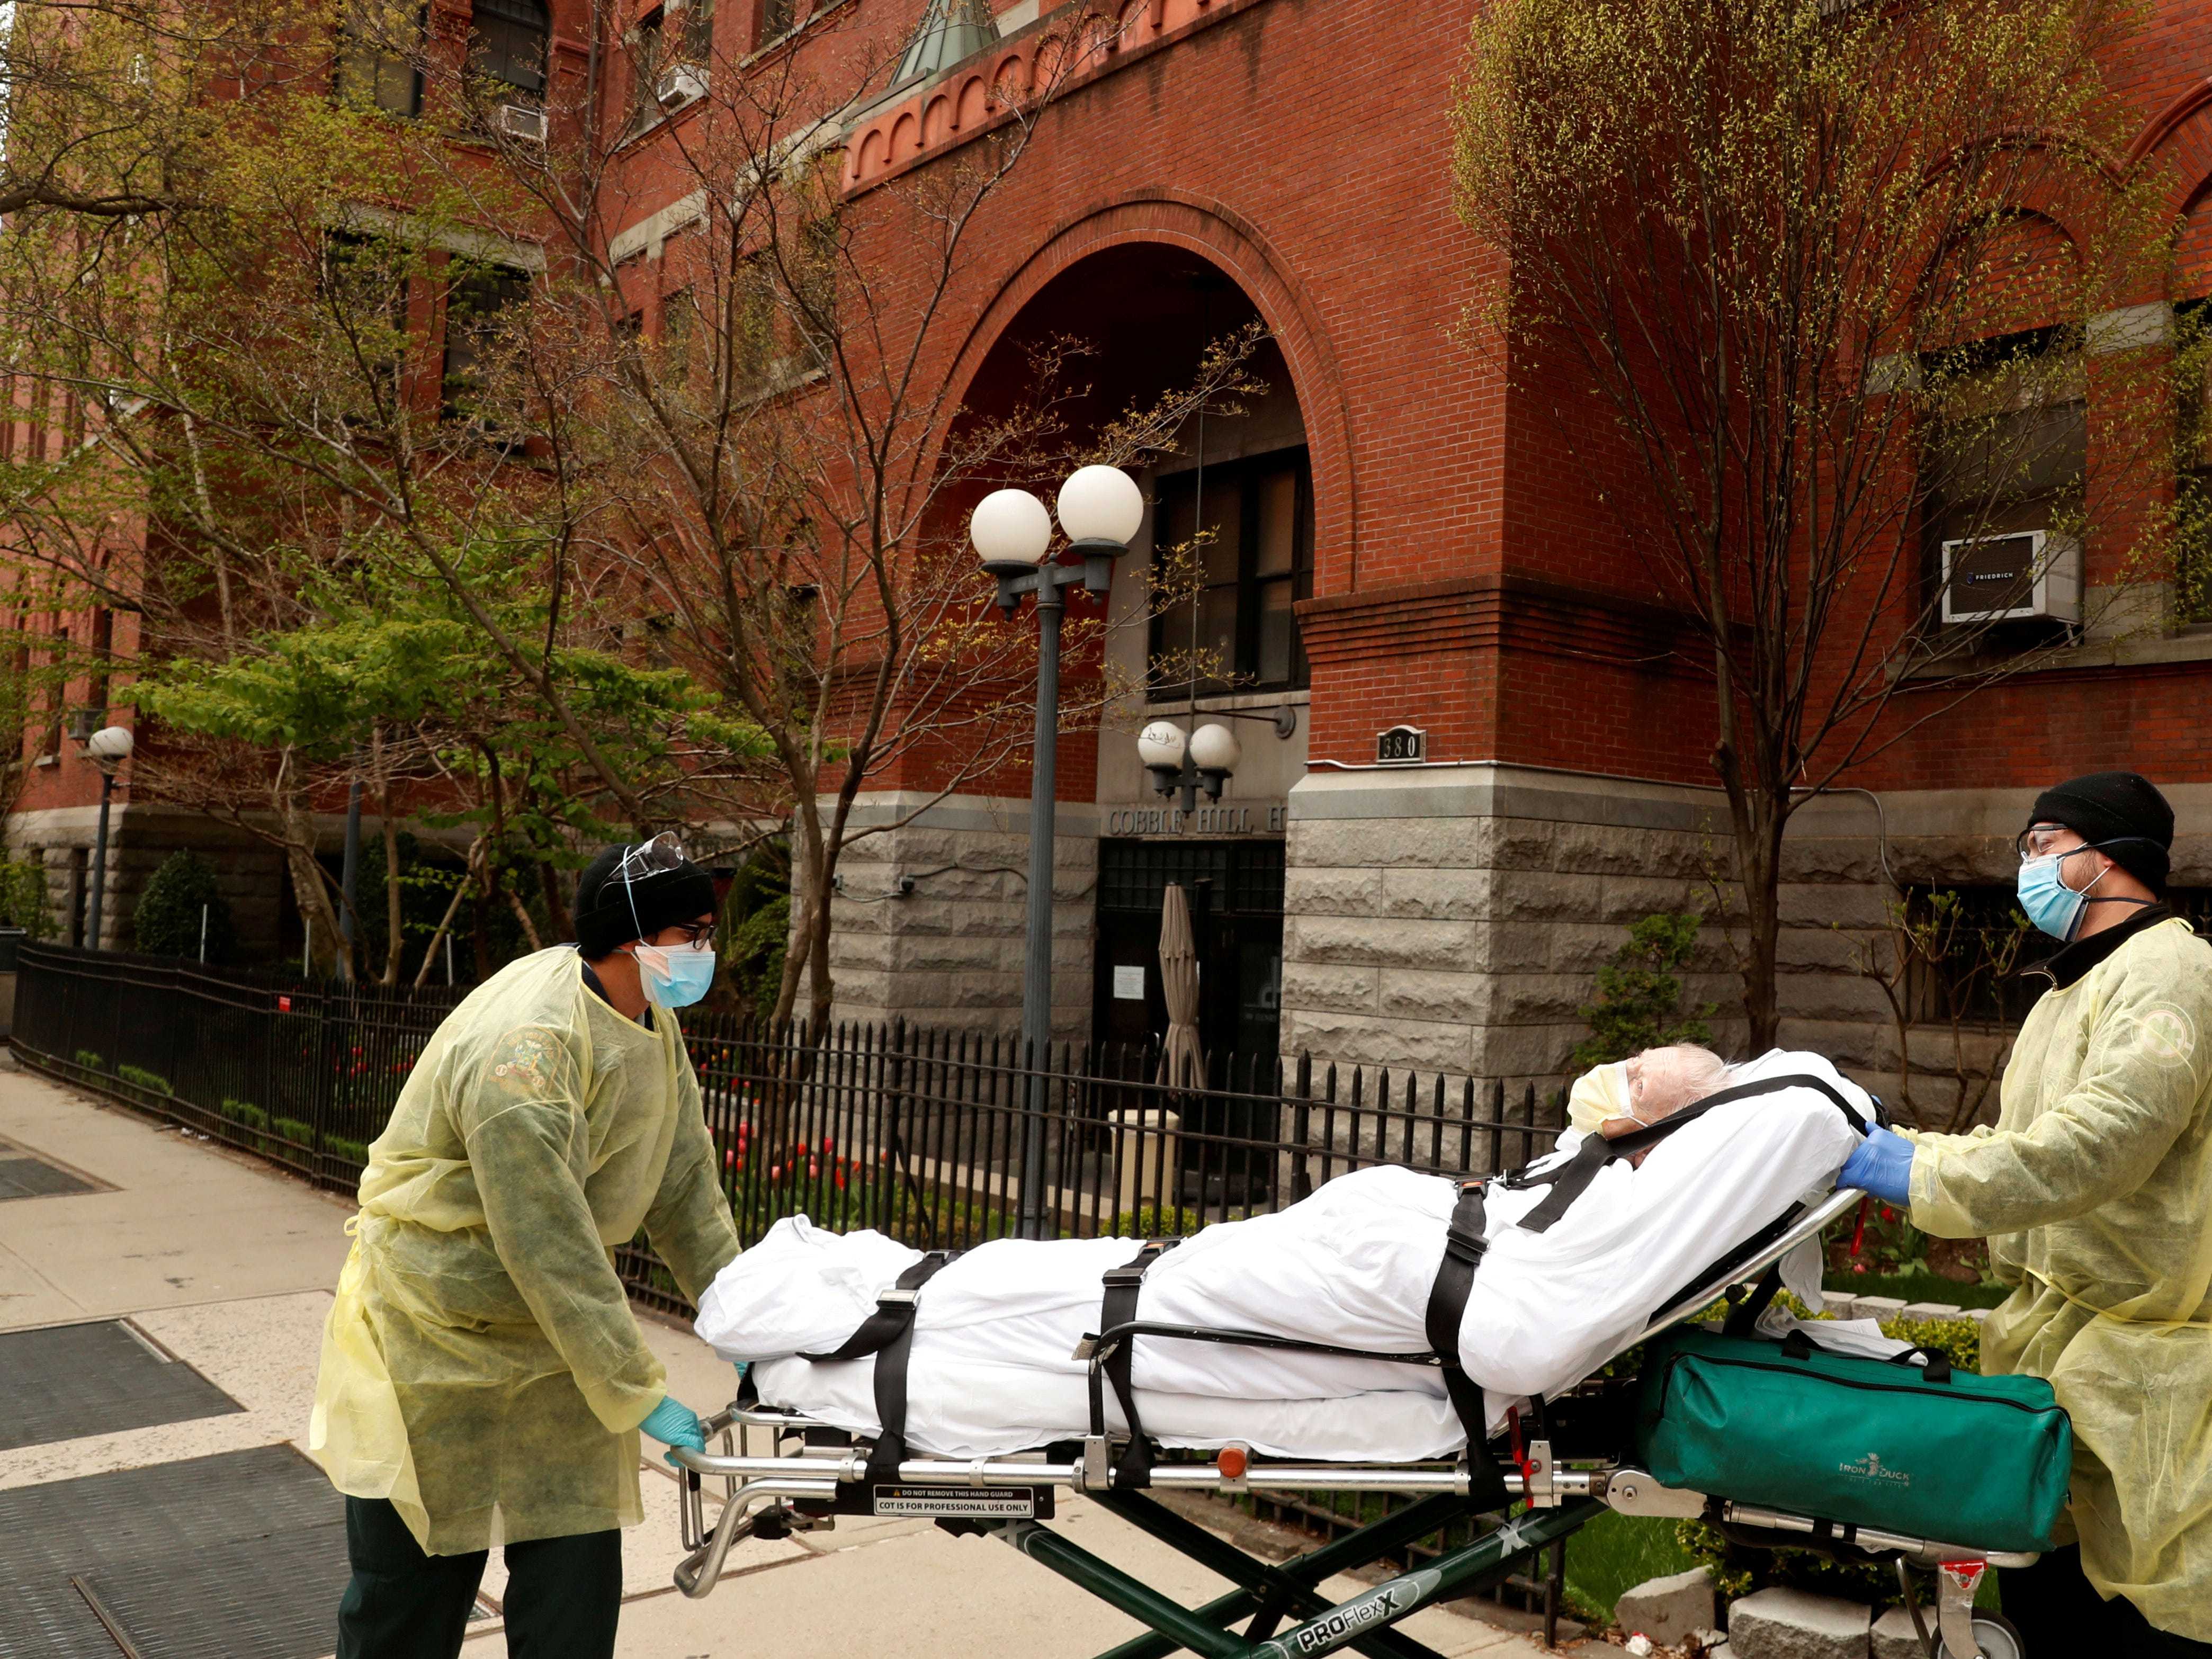 FILE PHOTO: Emergency Medical Technicians (EMTs) wheel a man out of the Cobble Hill Health Center nursing home during an ongoing outbreak of the coronavirus disease (COVID-19) in the Brooklyn borough of New York, U.S., April 17, 2020. REUTERS/Lucas Jackson